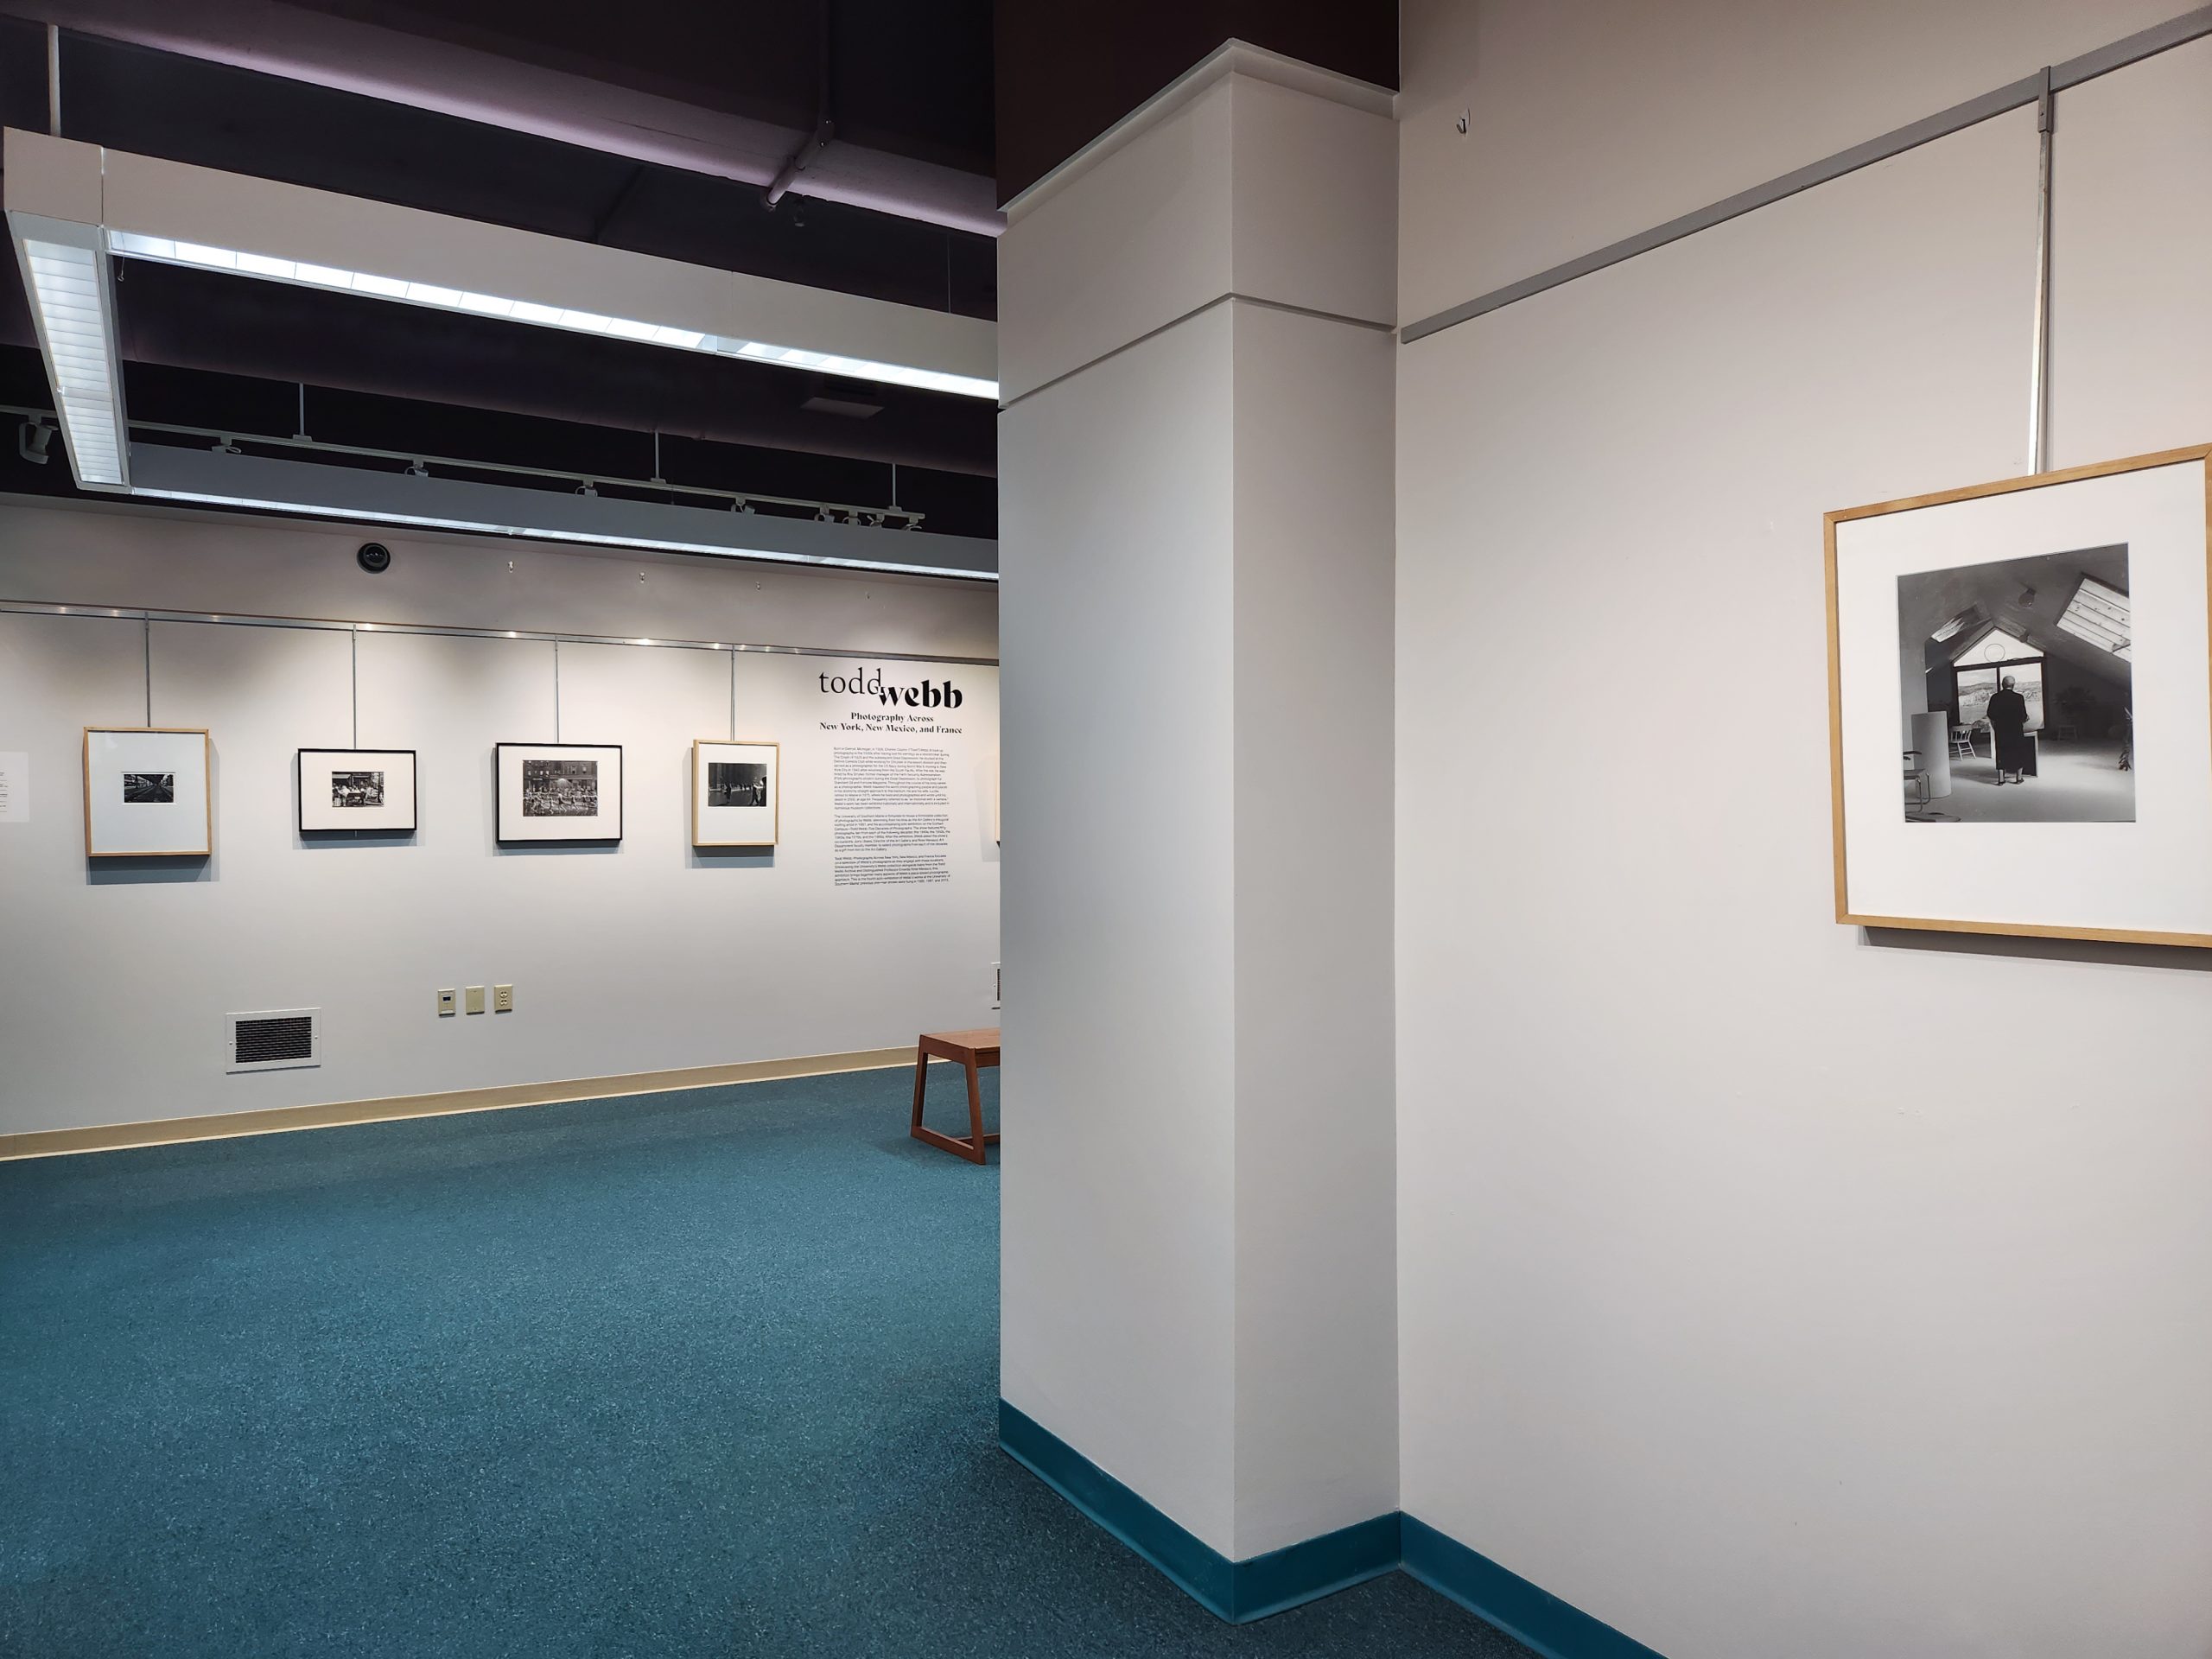 Foreground Right: "Studio Apartment, Paris," n.d. Silver Gelatin Print. 16 ¾ x 20 ¾ in. University of Southern Maine Collection. Installation view, "Todd Webb: Photography Across New York, New Mexico, and France." University of Southern Maine Glickman Library, 2023.